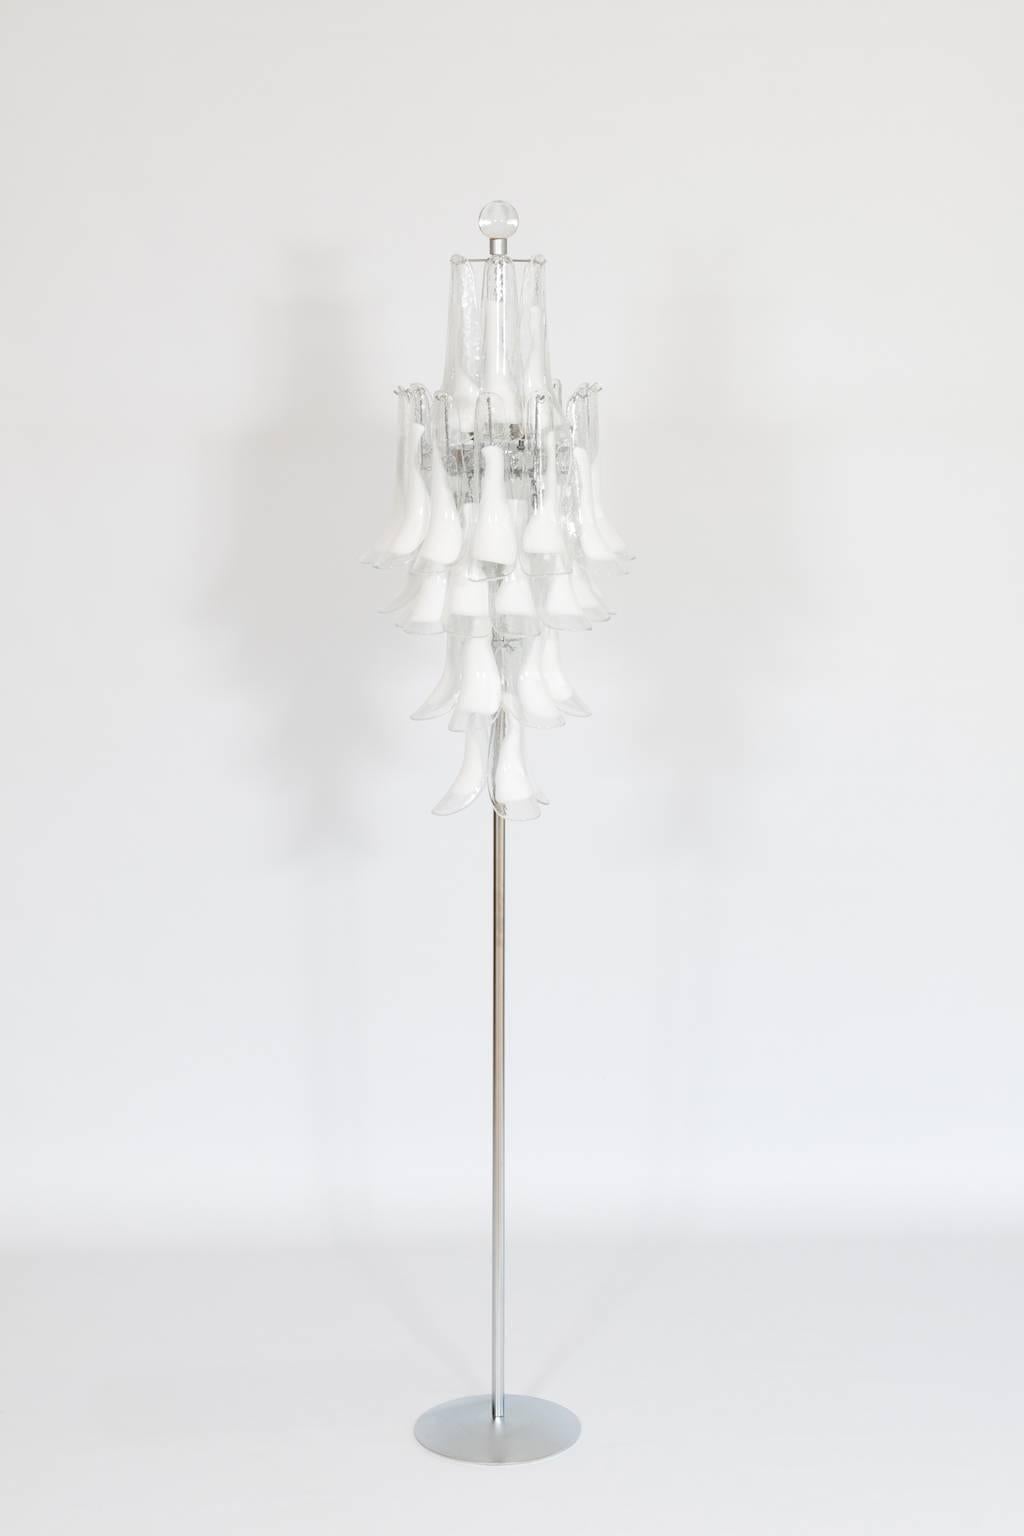 Italian Venetian floor lamp in Murano glass white, composed by white elements disposal in various levels, all is supported by a chrome frame with six lights, with above a glass sphere. All is in very excellent original condition attributed to 